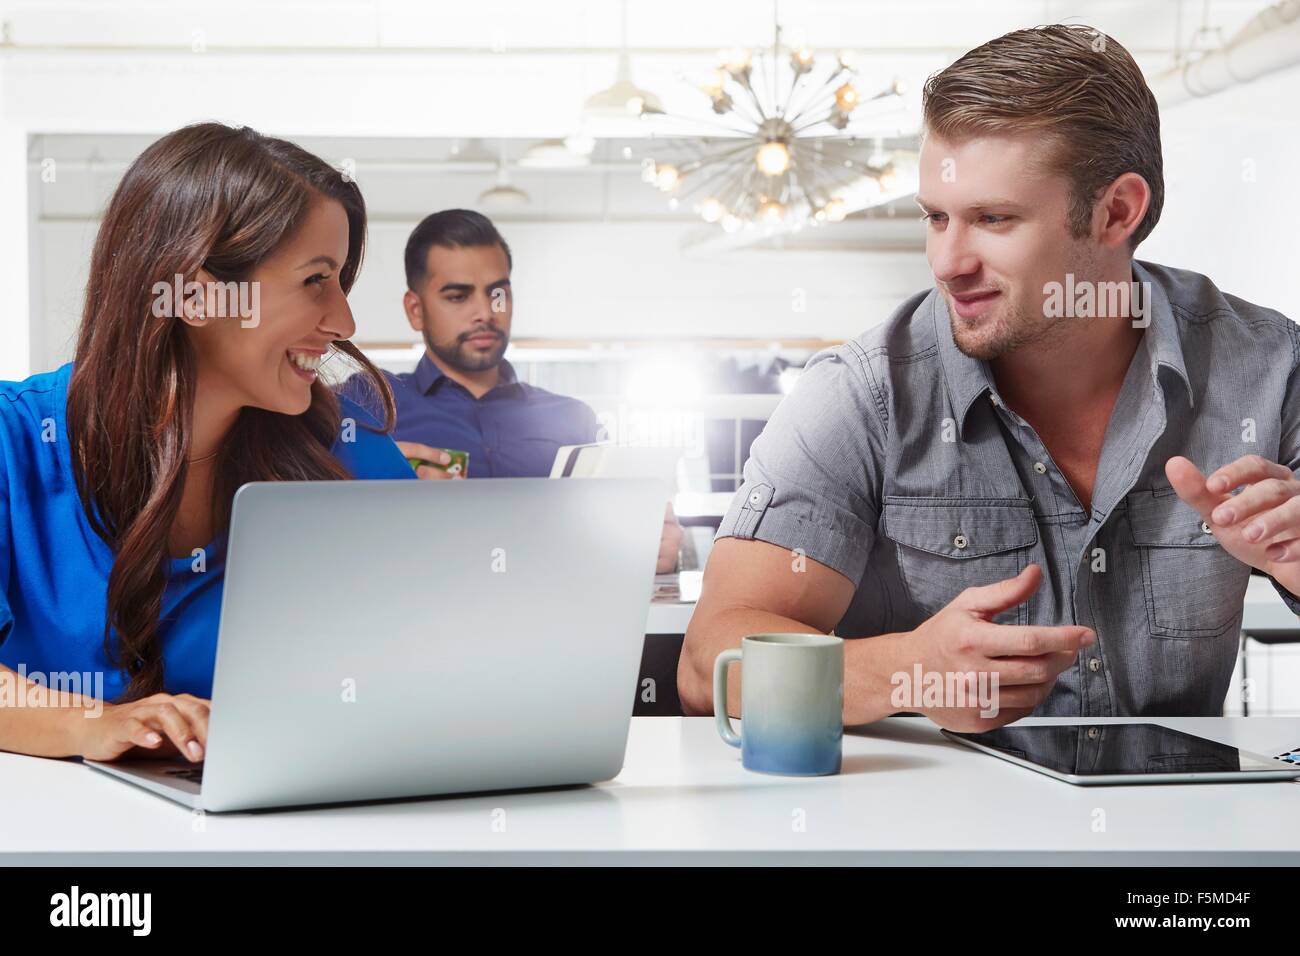 Two business colleagues having discussion at desk Stock Photo